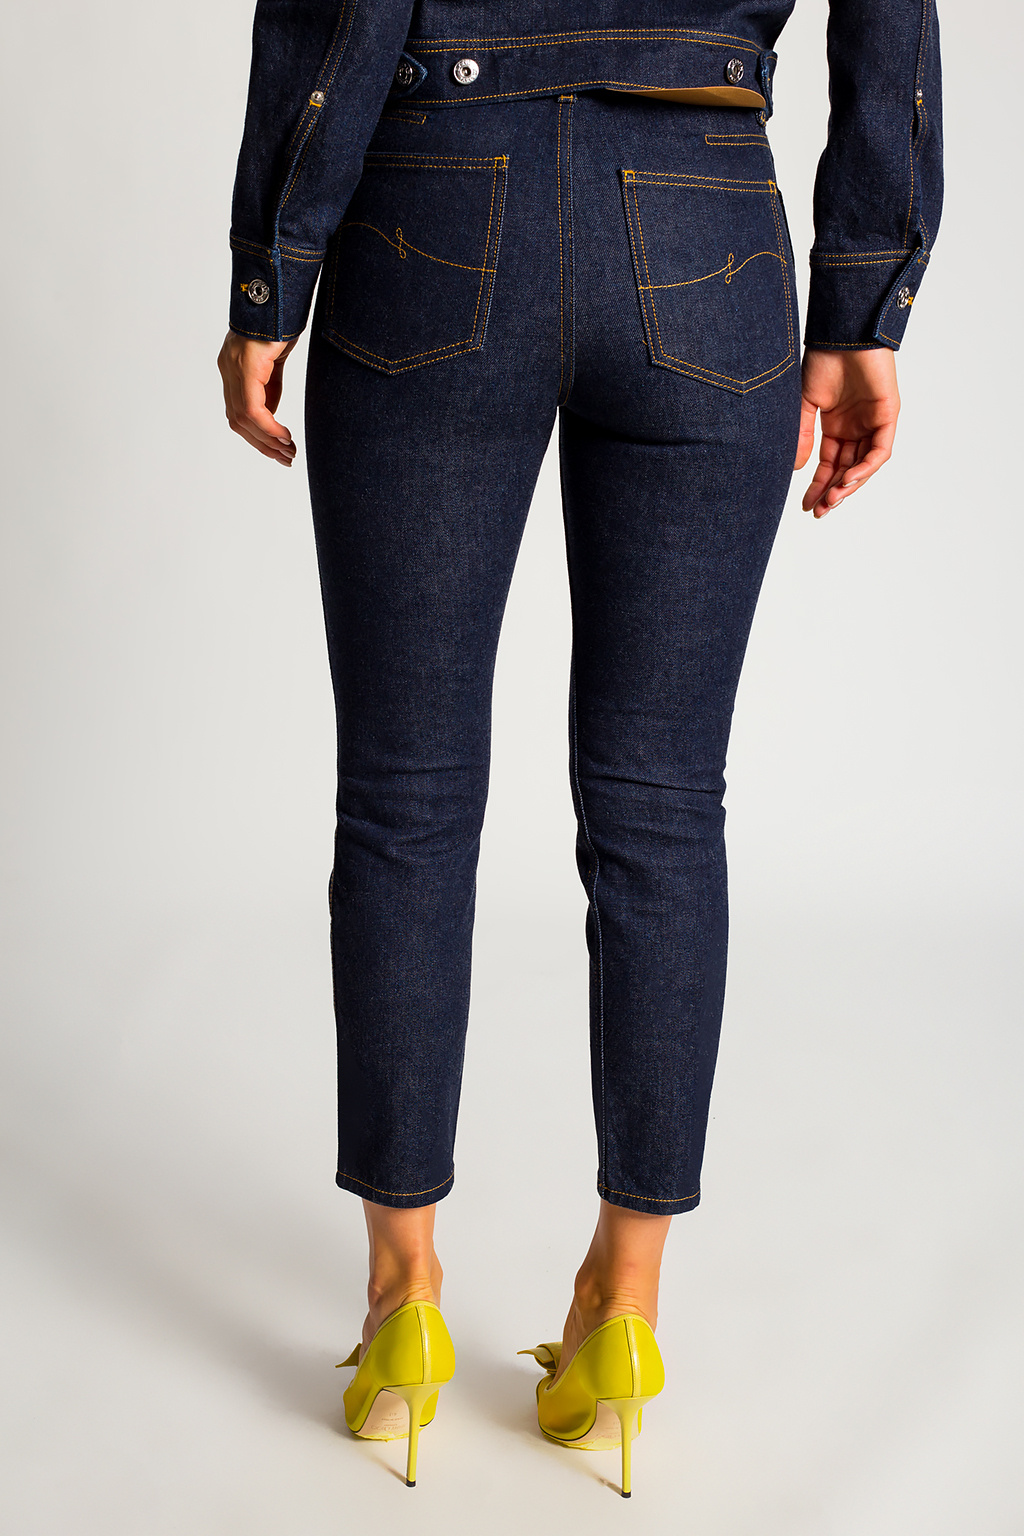 Lanvin High-waisted jeans